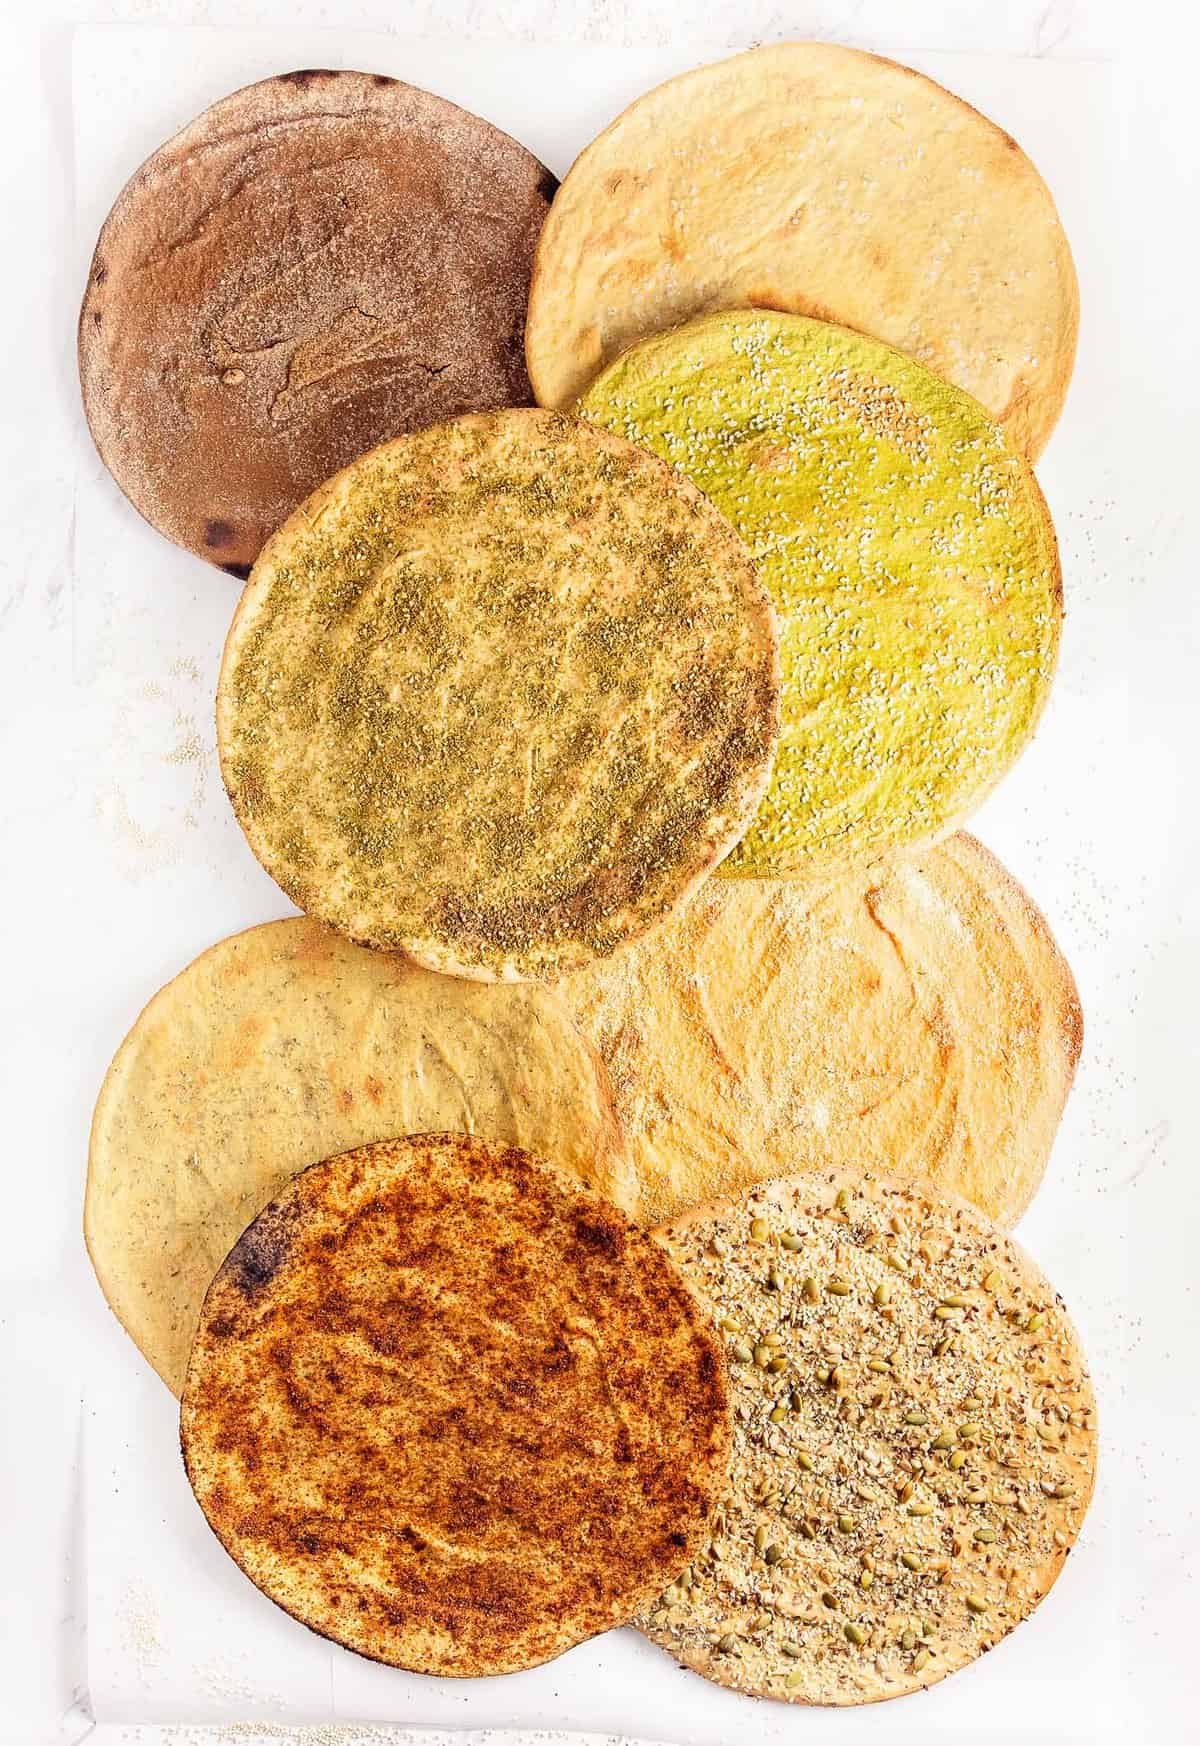 quinoa flatbreads, vegan, vegetarian, whole food plant based, gluten free, recipe, wfpb, healthy, oil free, no refined sugar, no oil, refined sugar free, dinner, side, side dish, dairy free, dinner party, entertaining